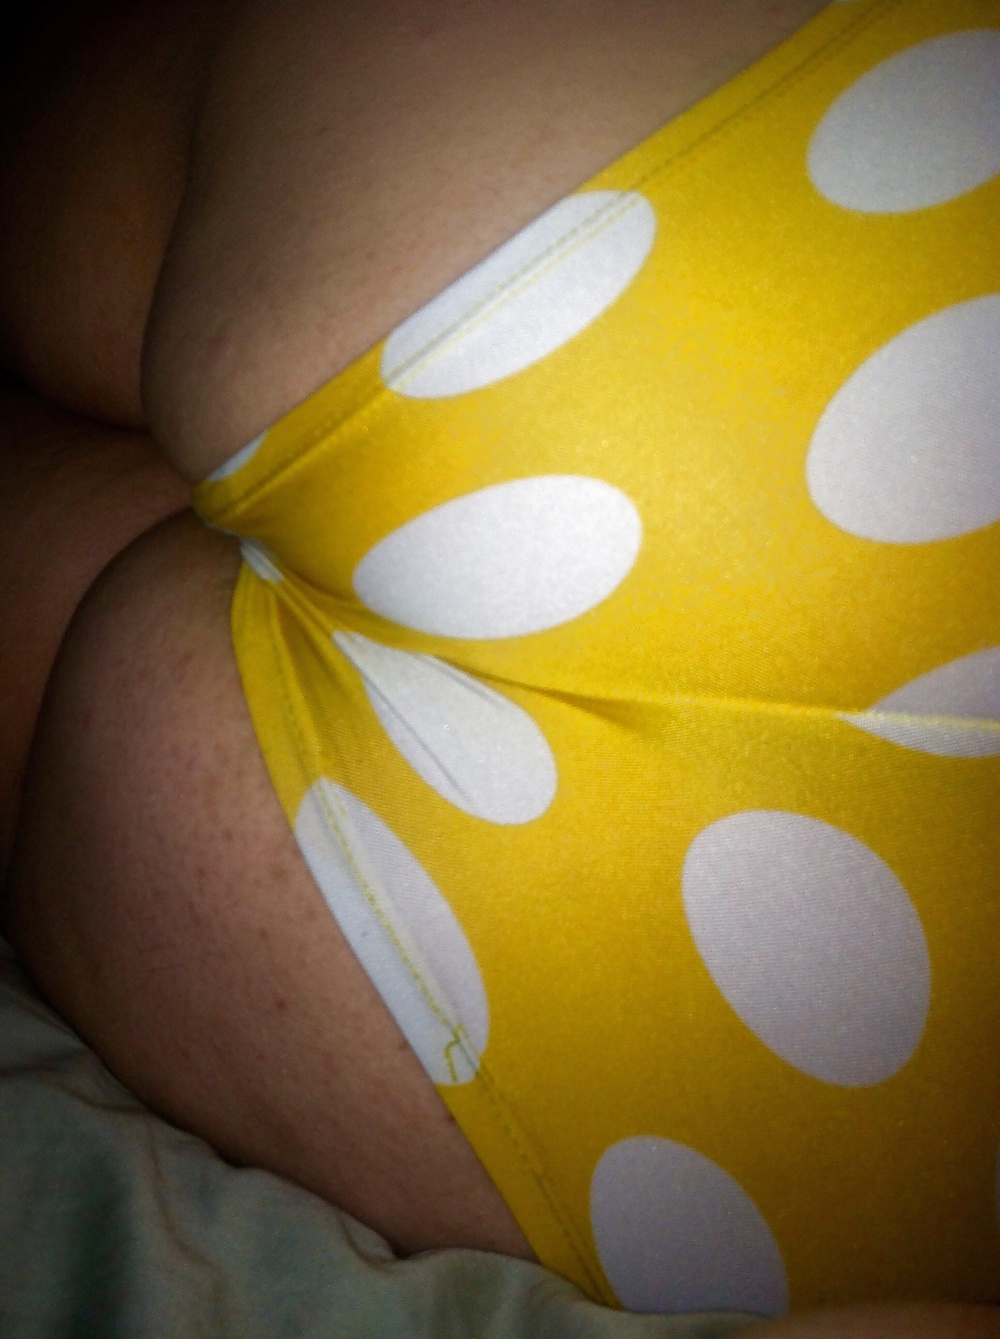 BBW wife Laura wearing wet, soiled, and cum stained panties. (1/8)